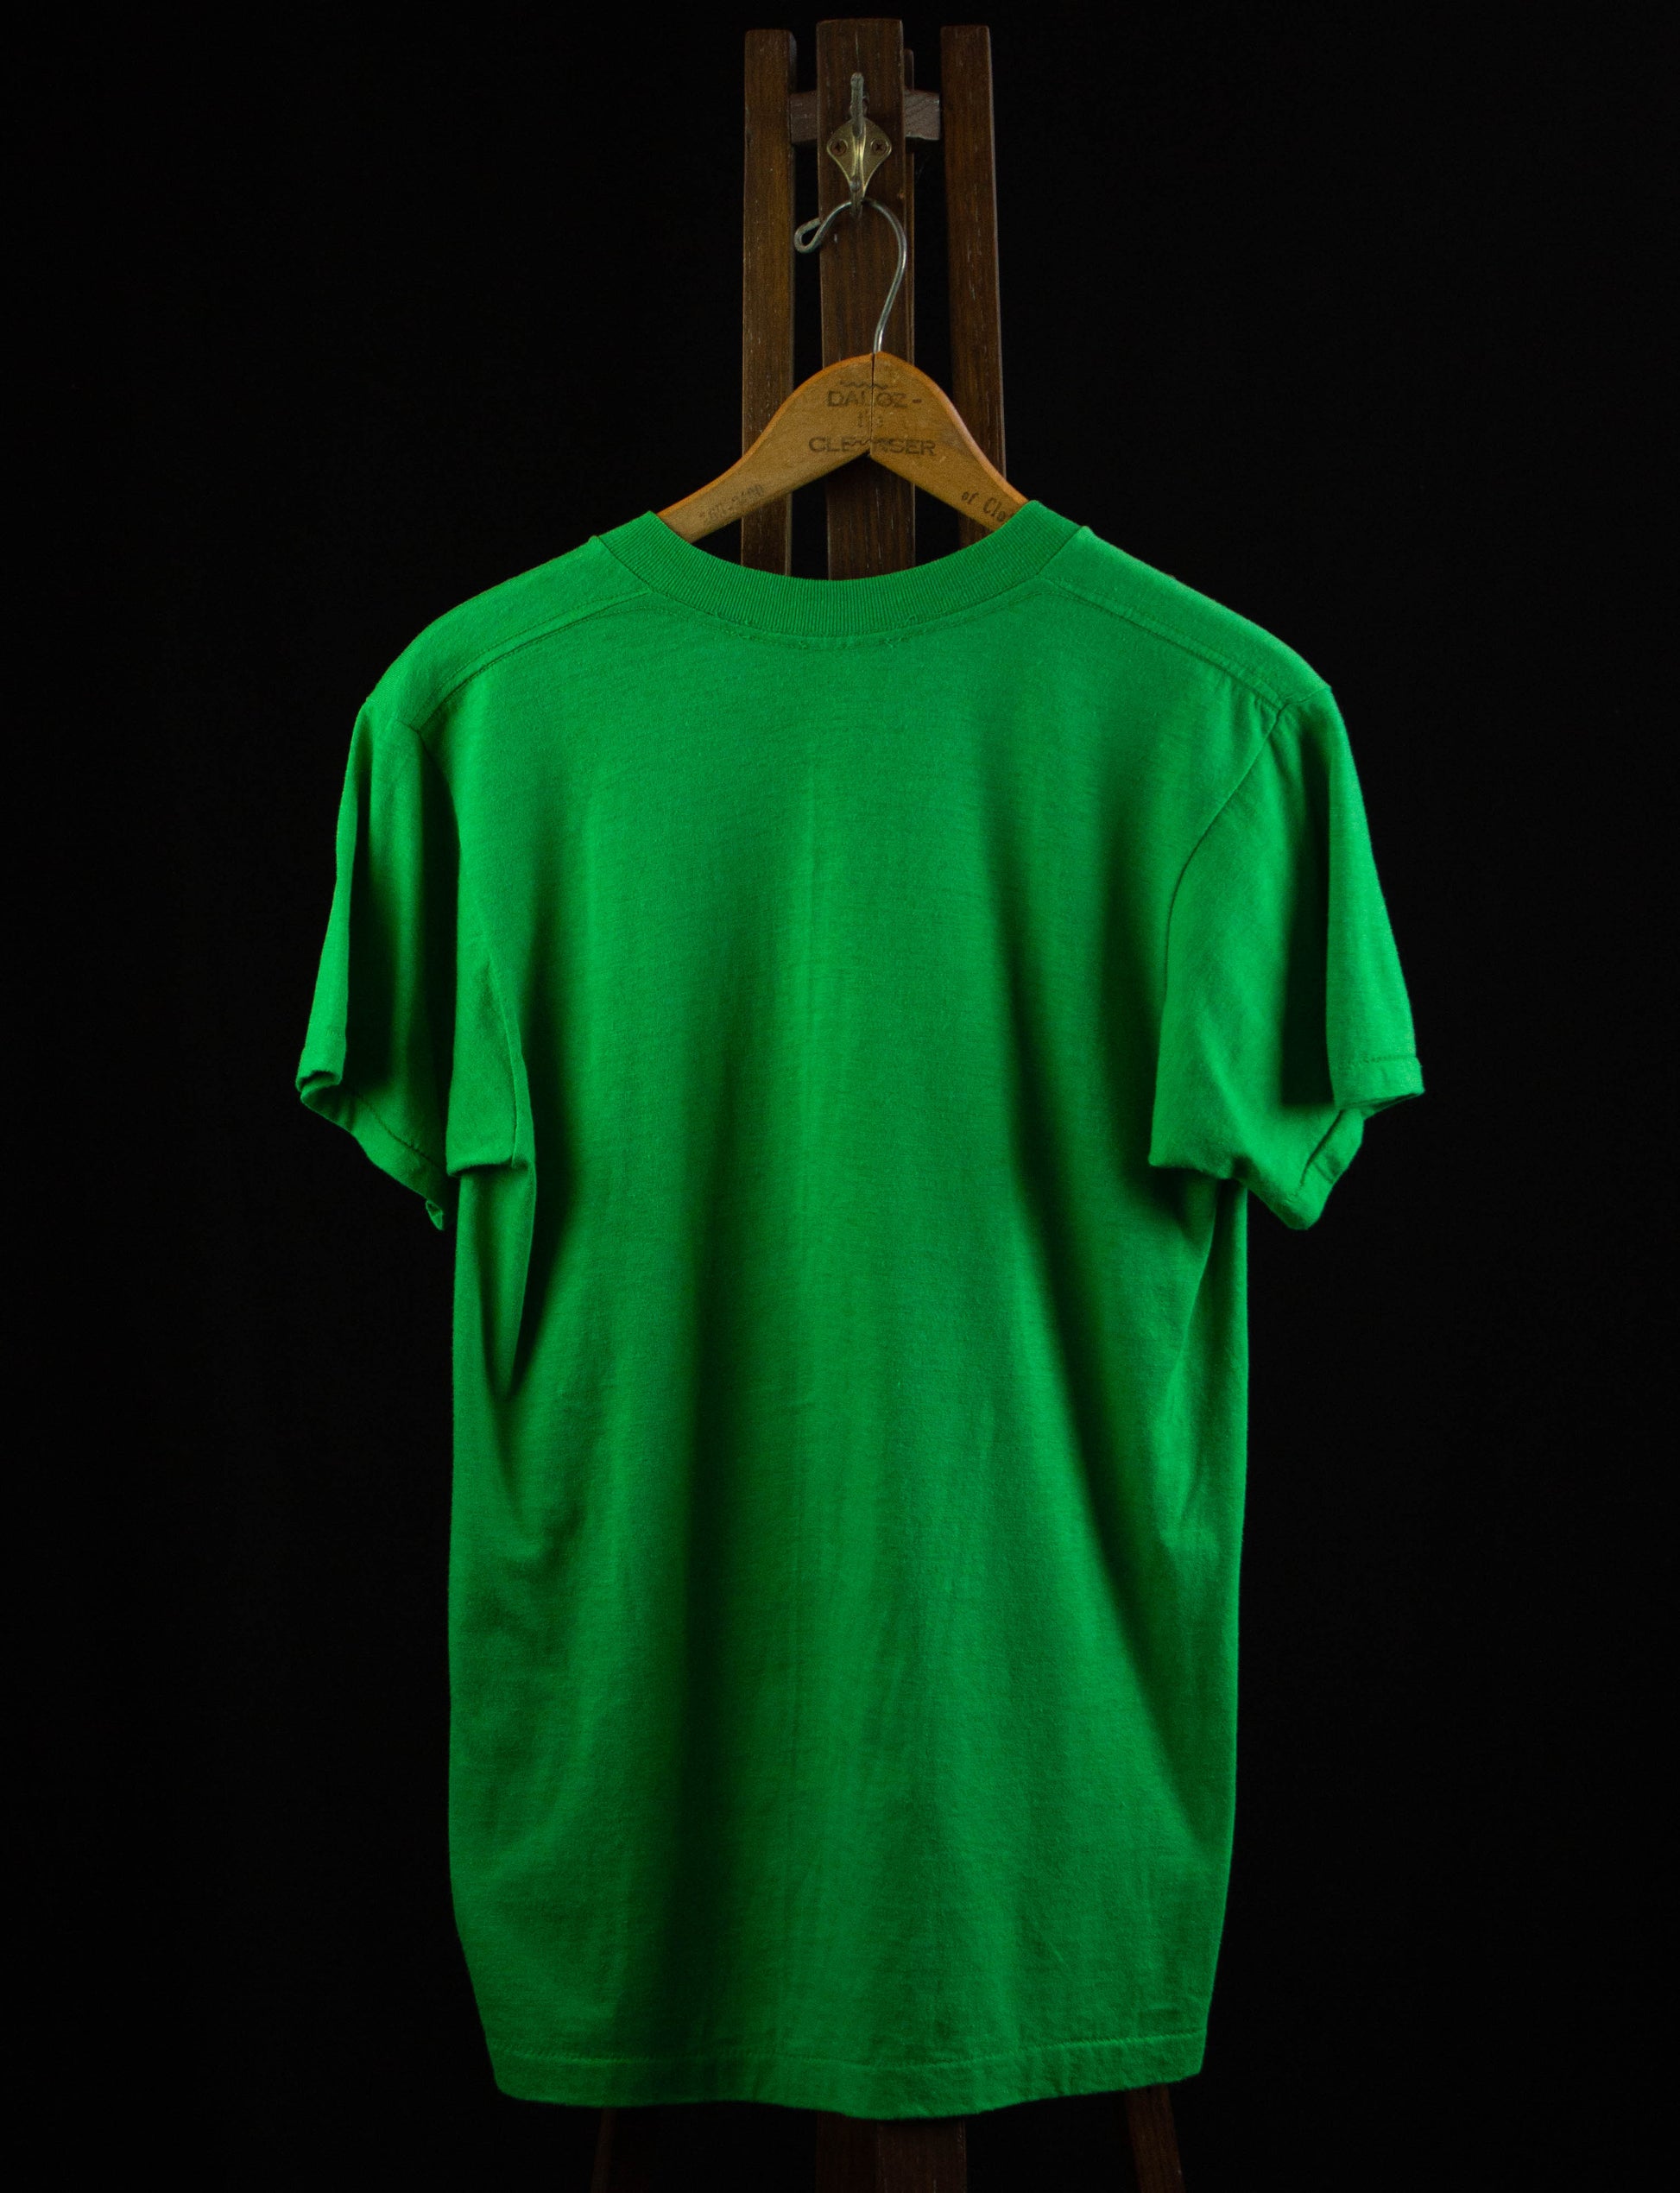 W One Vintage Shag Black Vintage – One Green People...Please Planet Graphic T Shirt and 80s